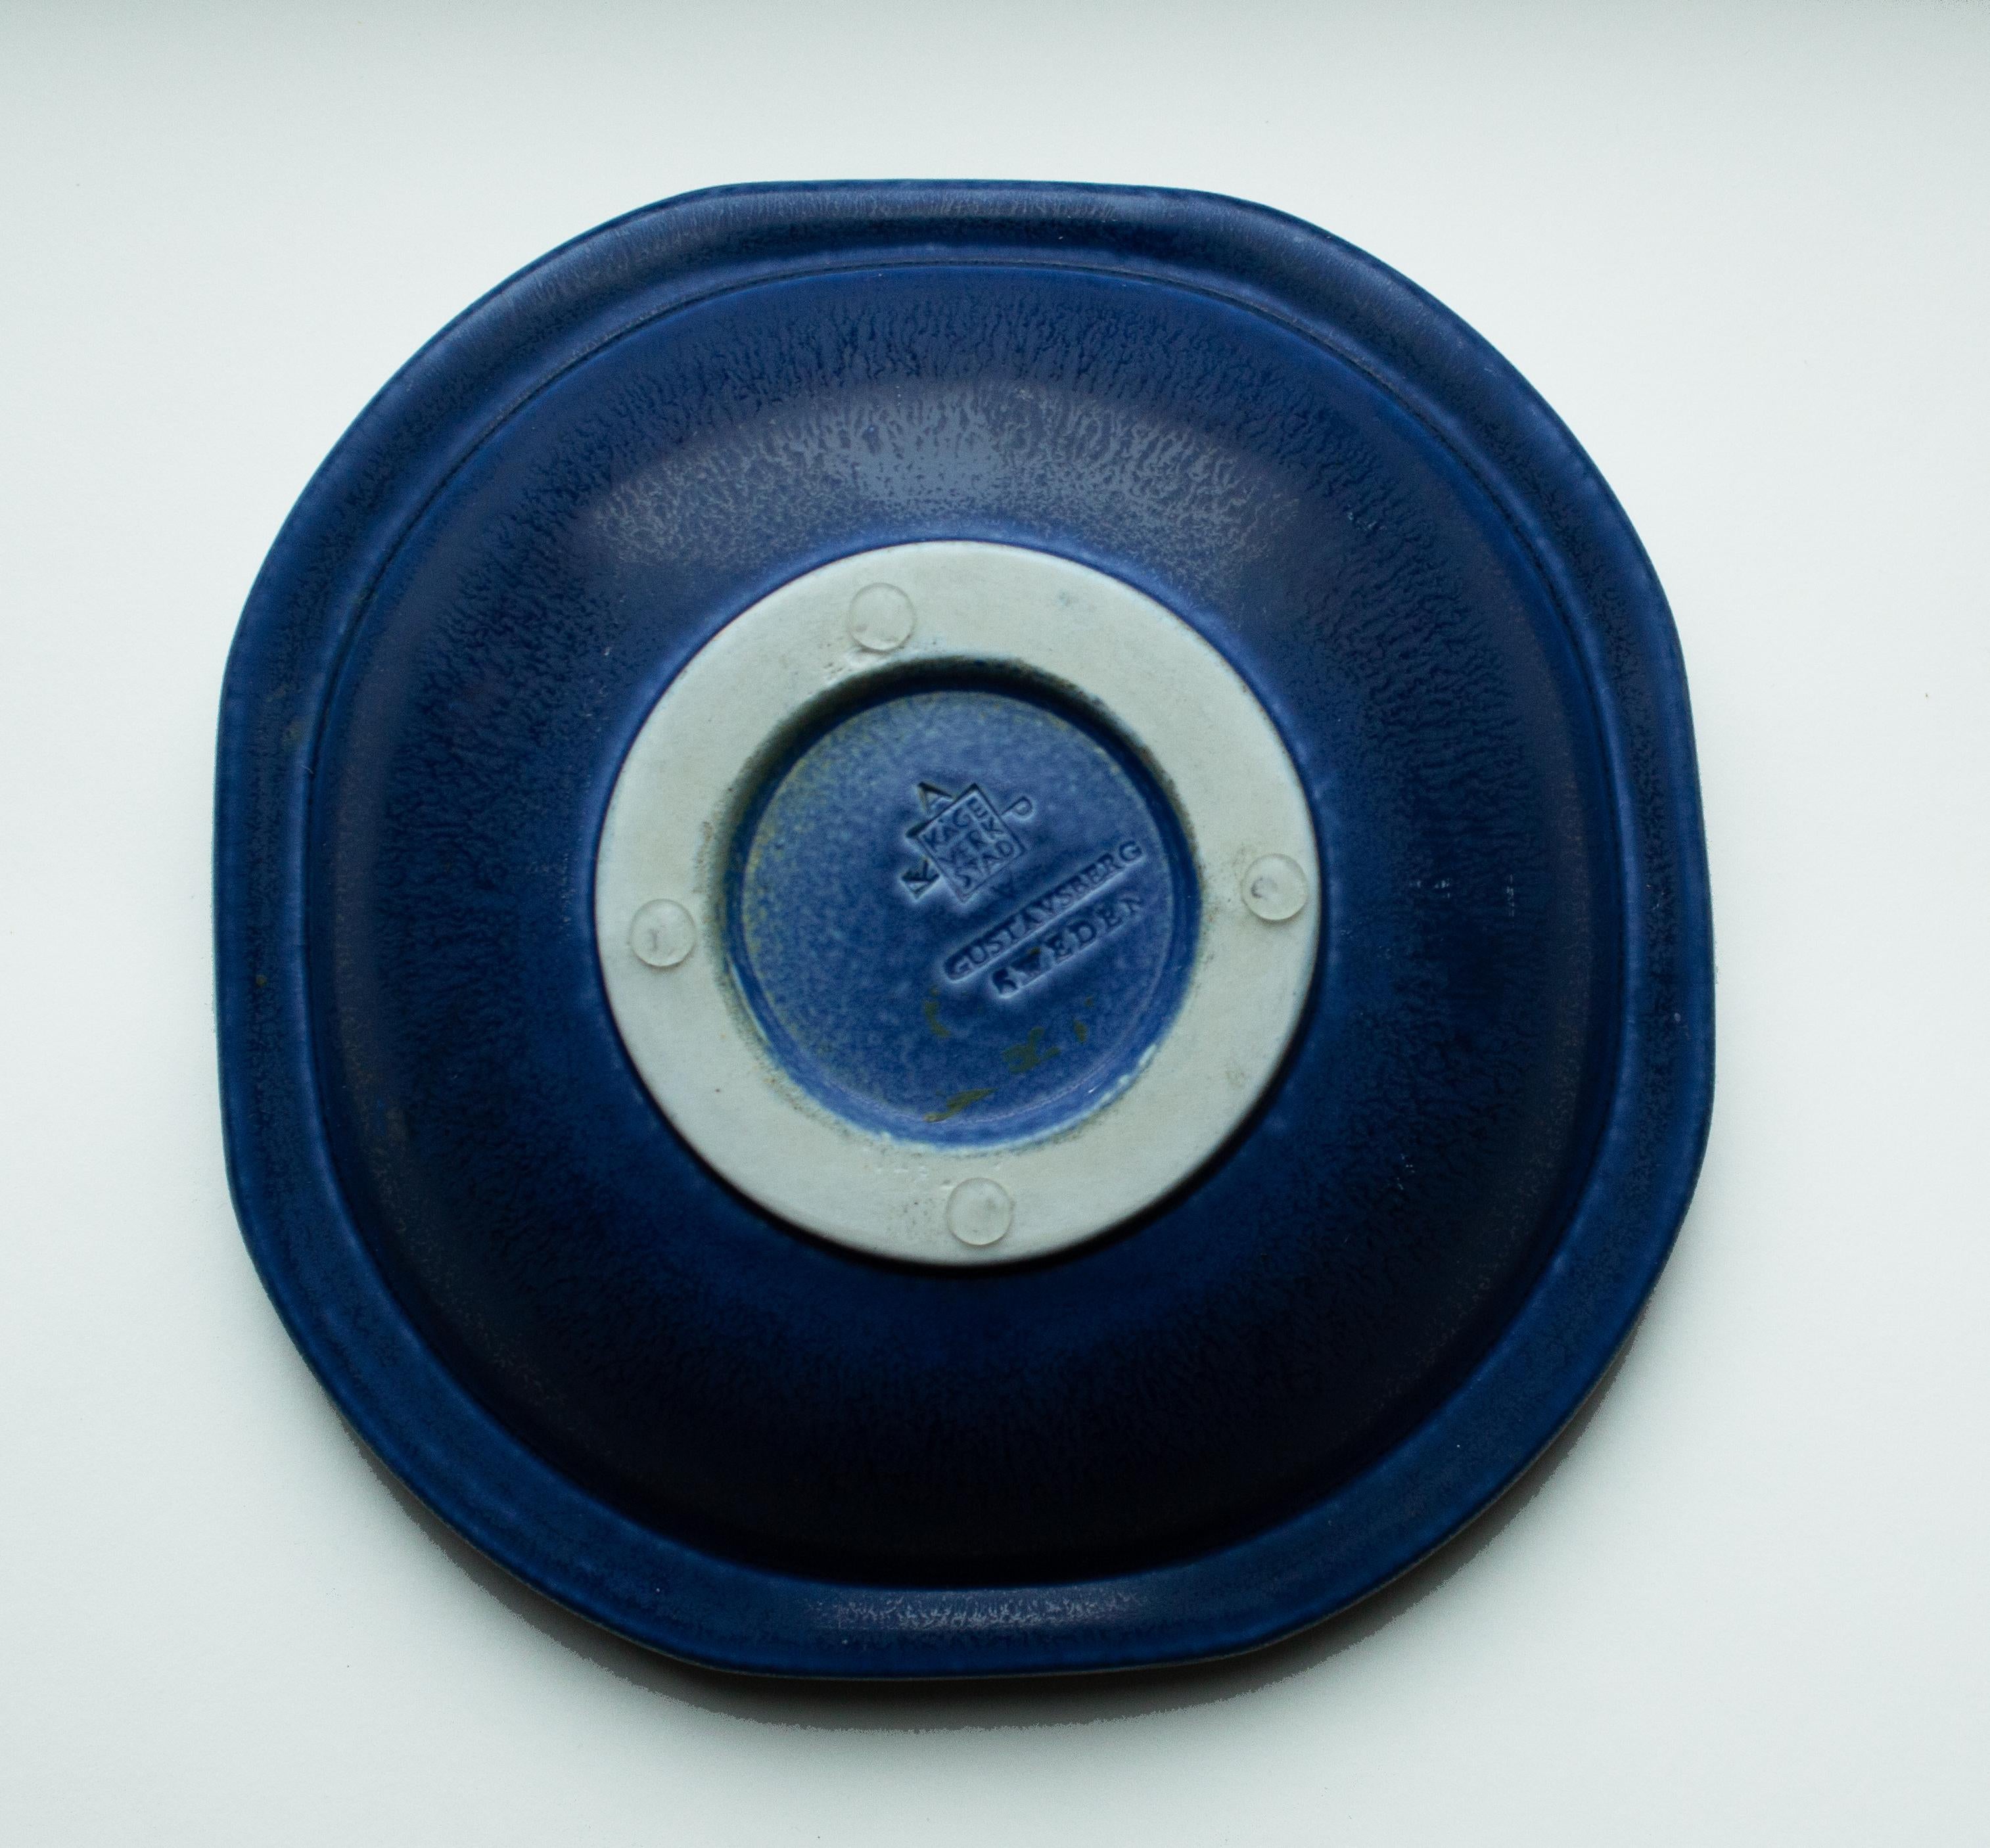 Wilhelm Kåge Blue Bowl in Stoneware from 1958, Gustavsberg, Sweden. Wilhelm Kåge's bowl with a gently octagonal form, blue glaze, and relief decor. It was designed in 1958 at his Gustavsberg studio. A brilliant art piece from the Swedish